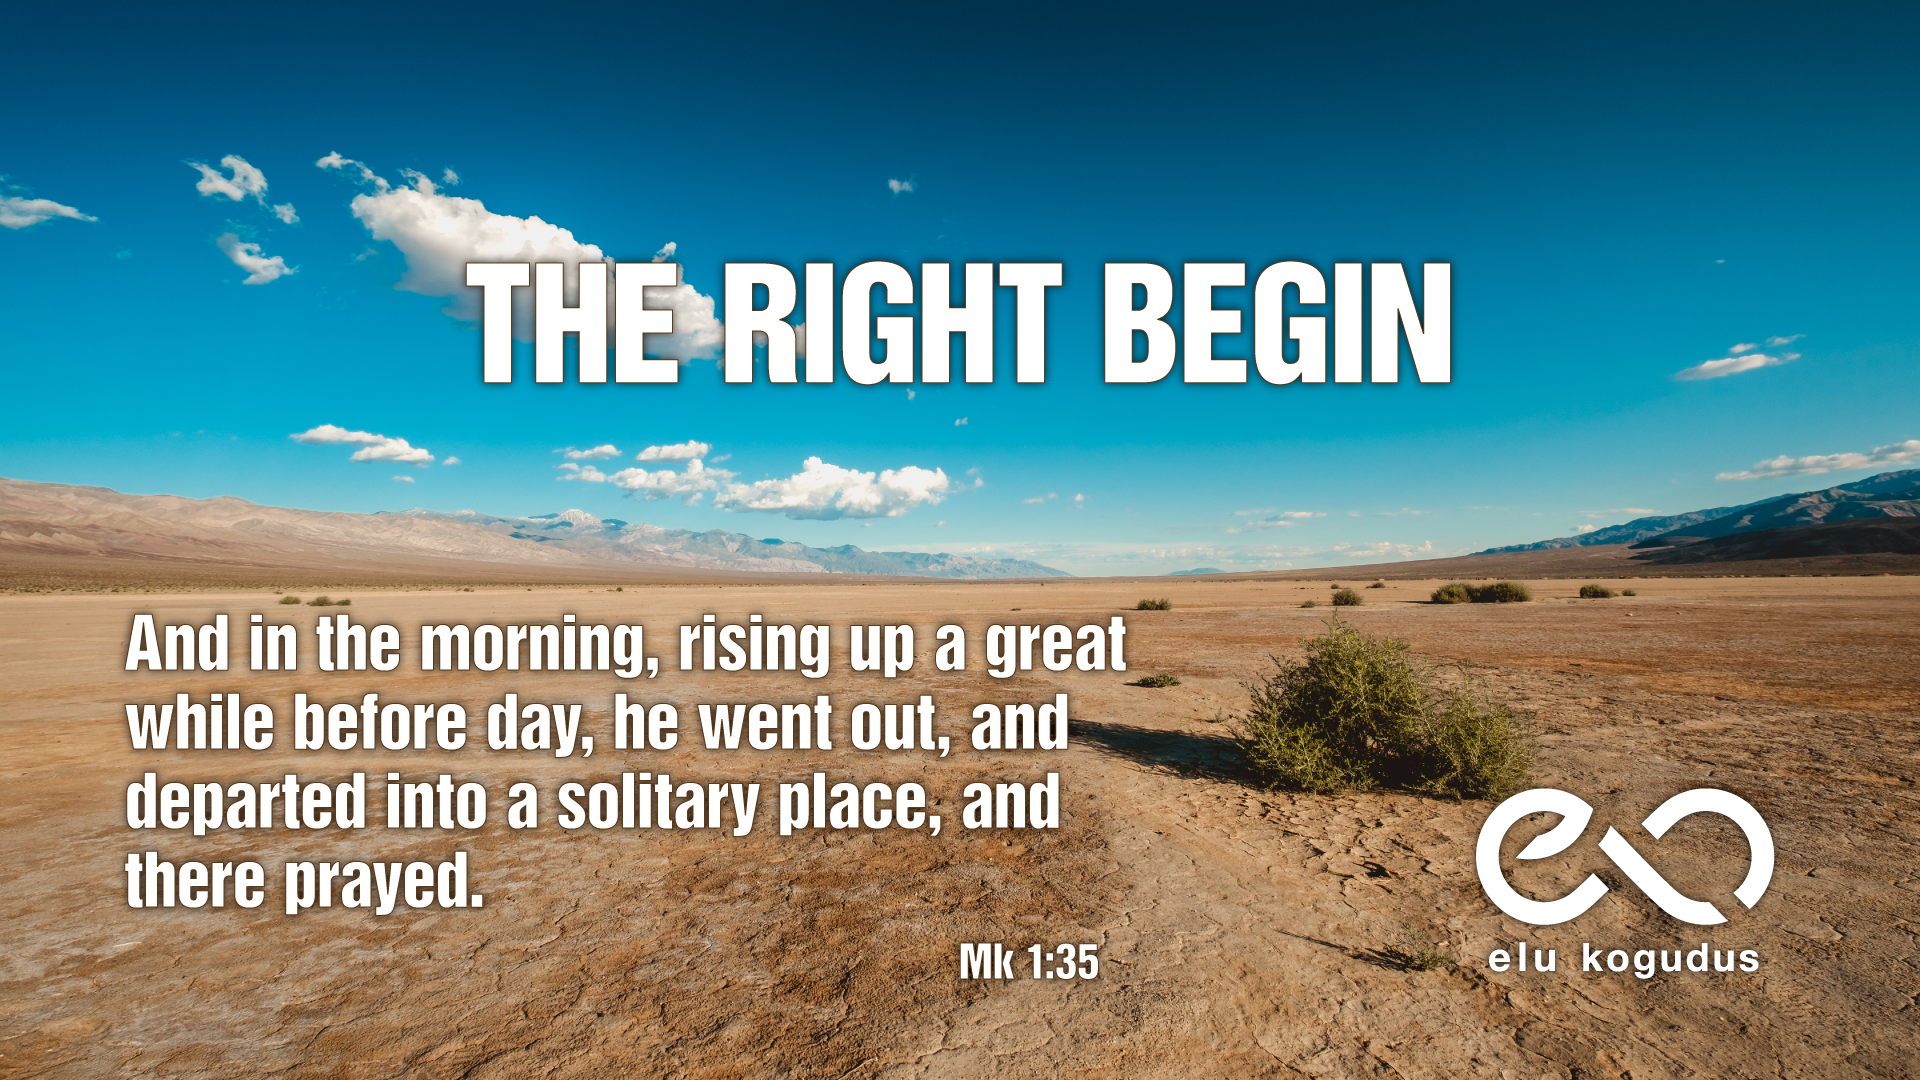 And in the morning, rising up a great while before day, he went out, and departed into a solitary place, and there prayed. Mk 1:35